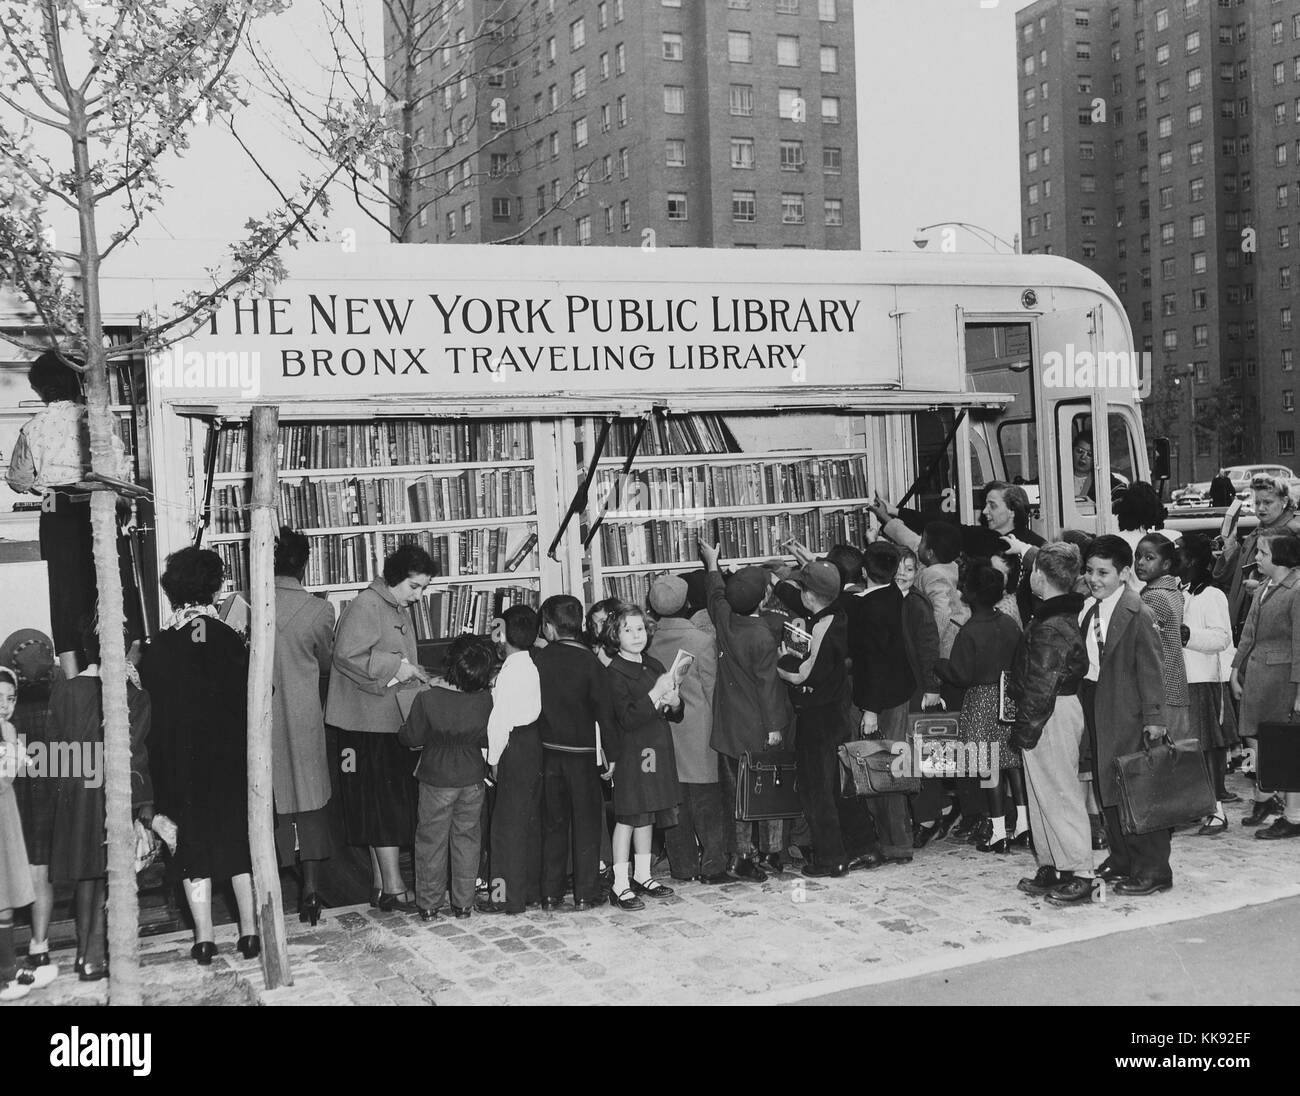 Black and white photograph showing a large group of young children, and some adults, at a bookmobile marked 'New York Public Library, Bronx Traveling Library', Bronx, New York City, New York, 1954. From the New York Public Library. Stock Photo